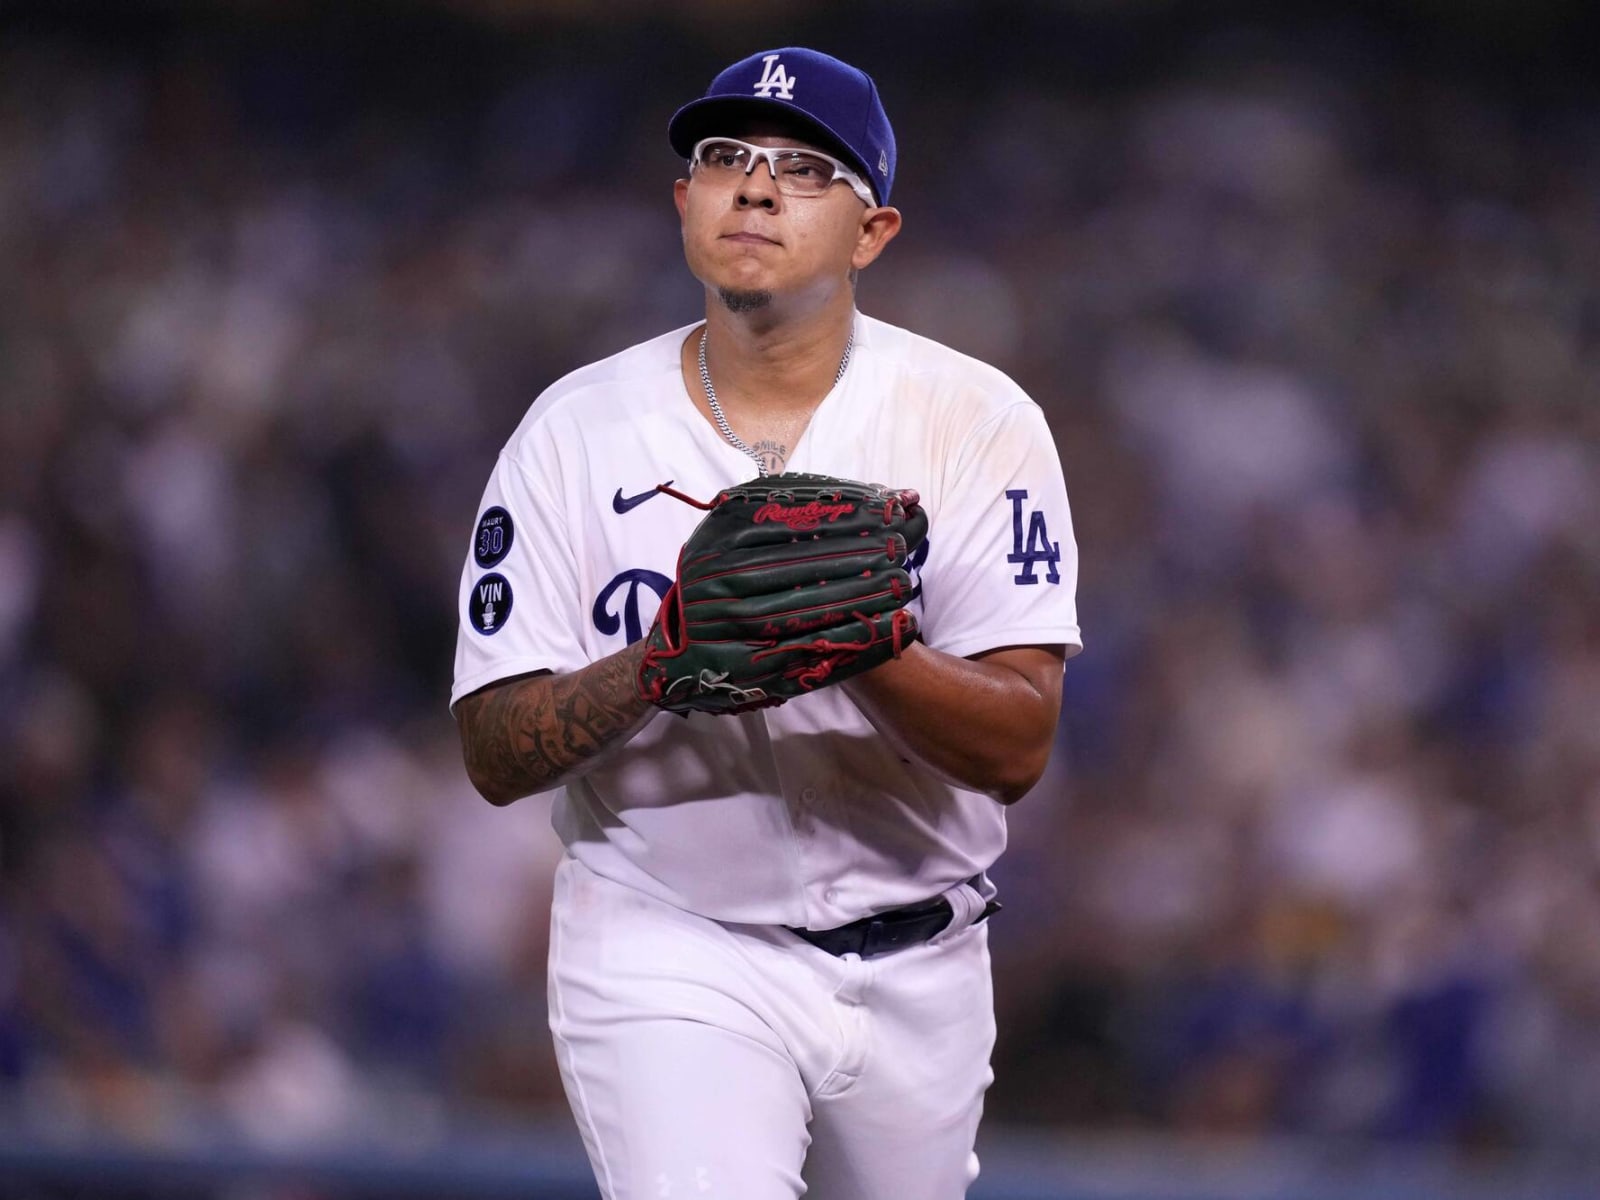 Report: Dodgers, Julio Urias avoid arbitration with $14.25M deal